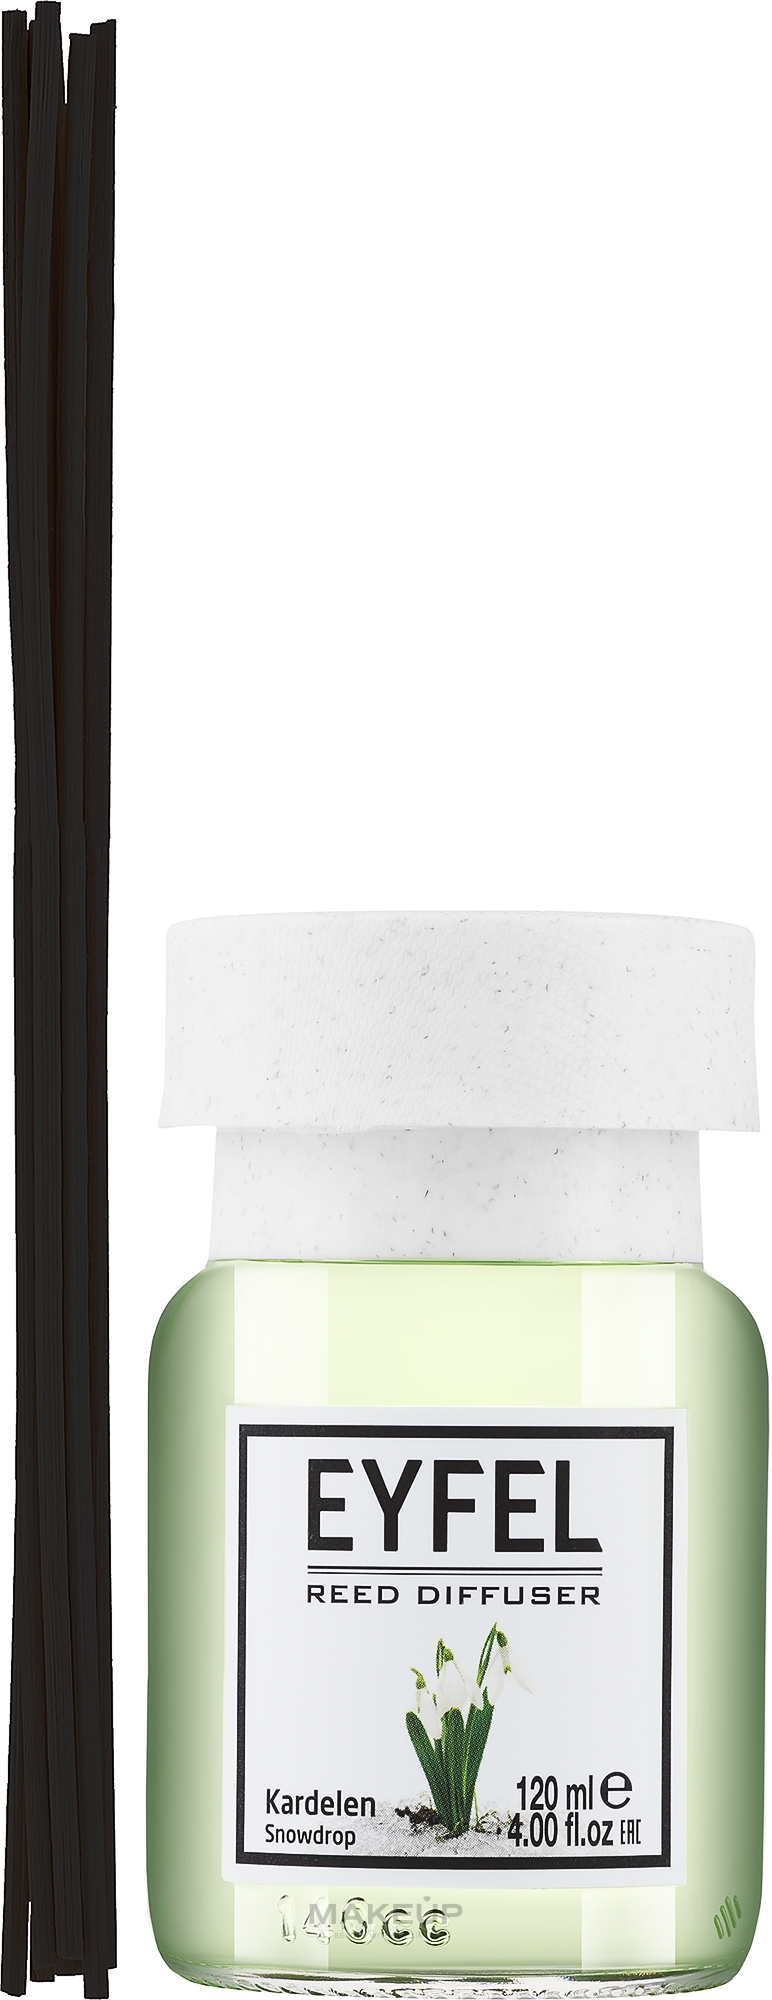 Reed Diffuser "Lily of the Valley" - Eyfel Perfume Reed Diffuser Snowdrop — photo 120 ml